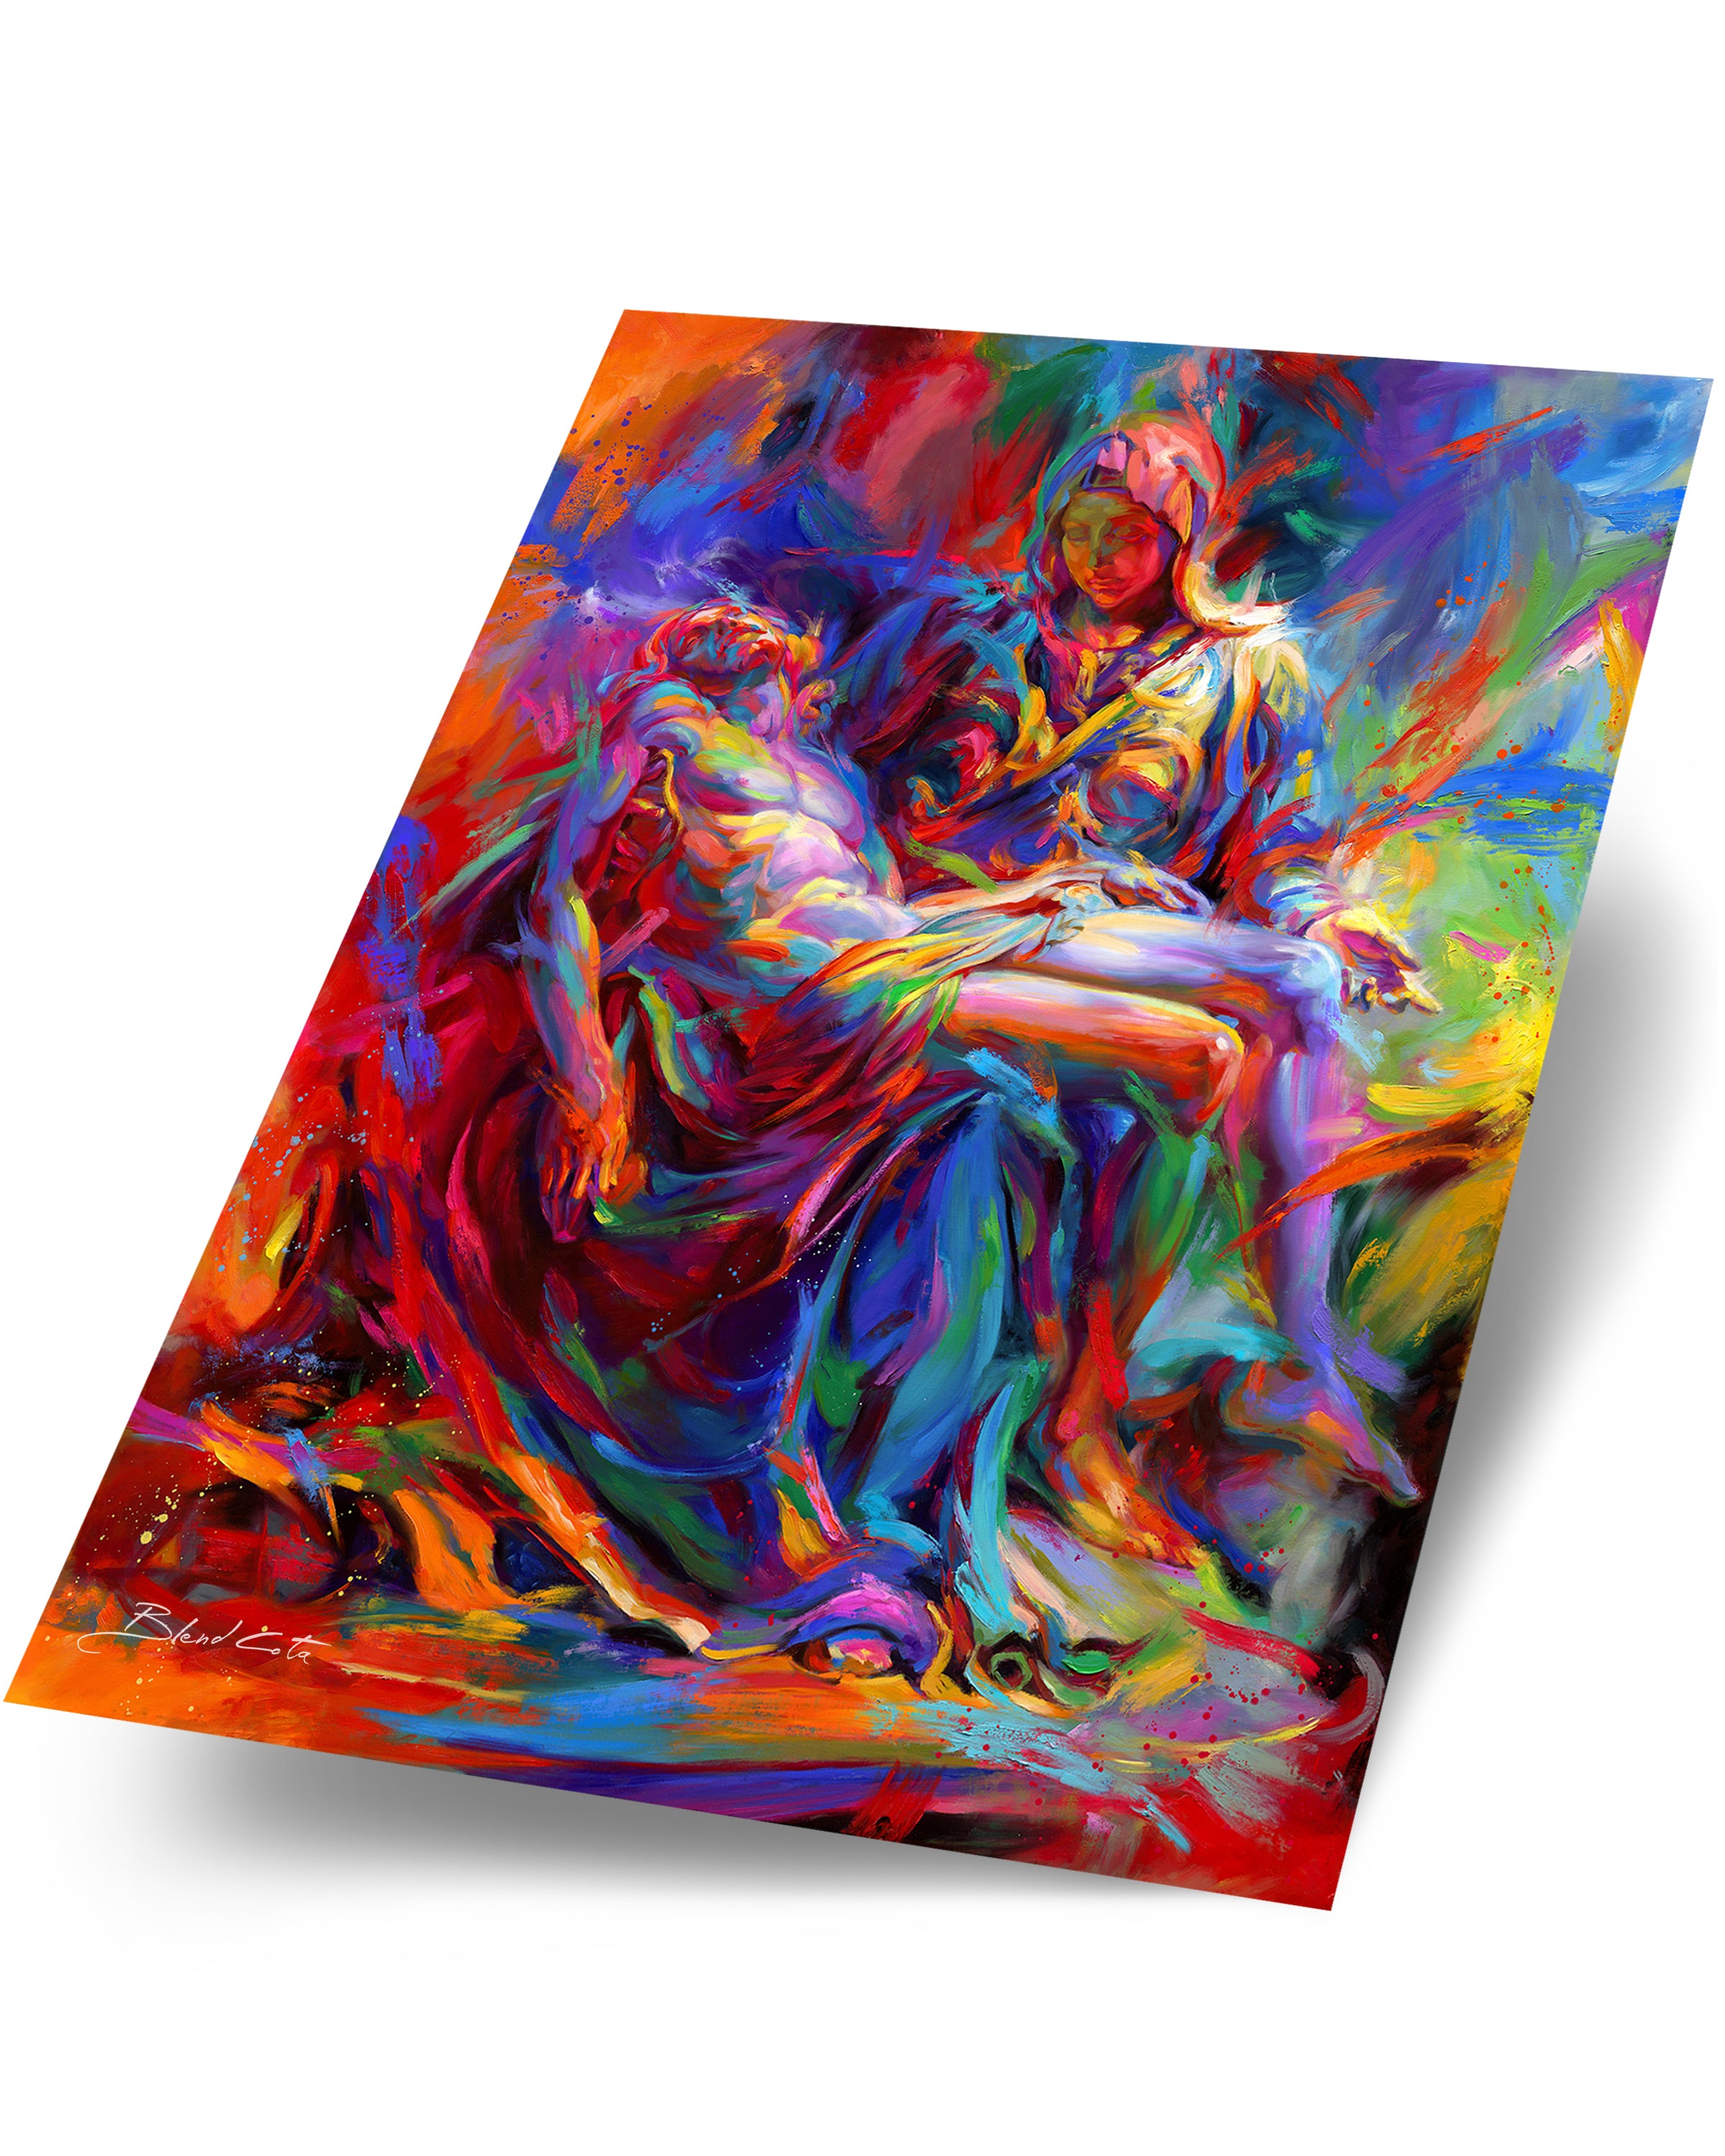 A painting depicting Jesus and his mother holding him, originally sculpted by Michelangelo, revisualized with bright colorful brushstrokes.